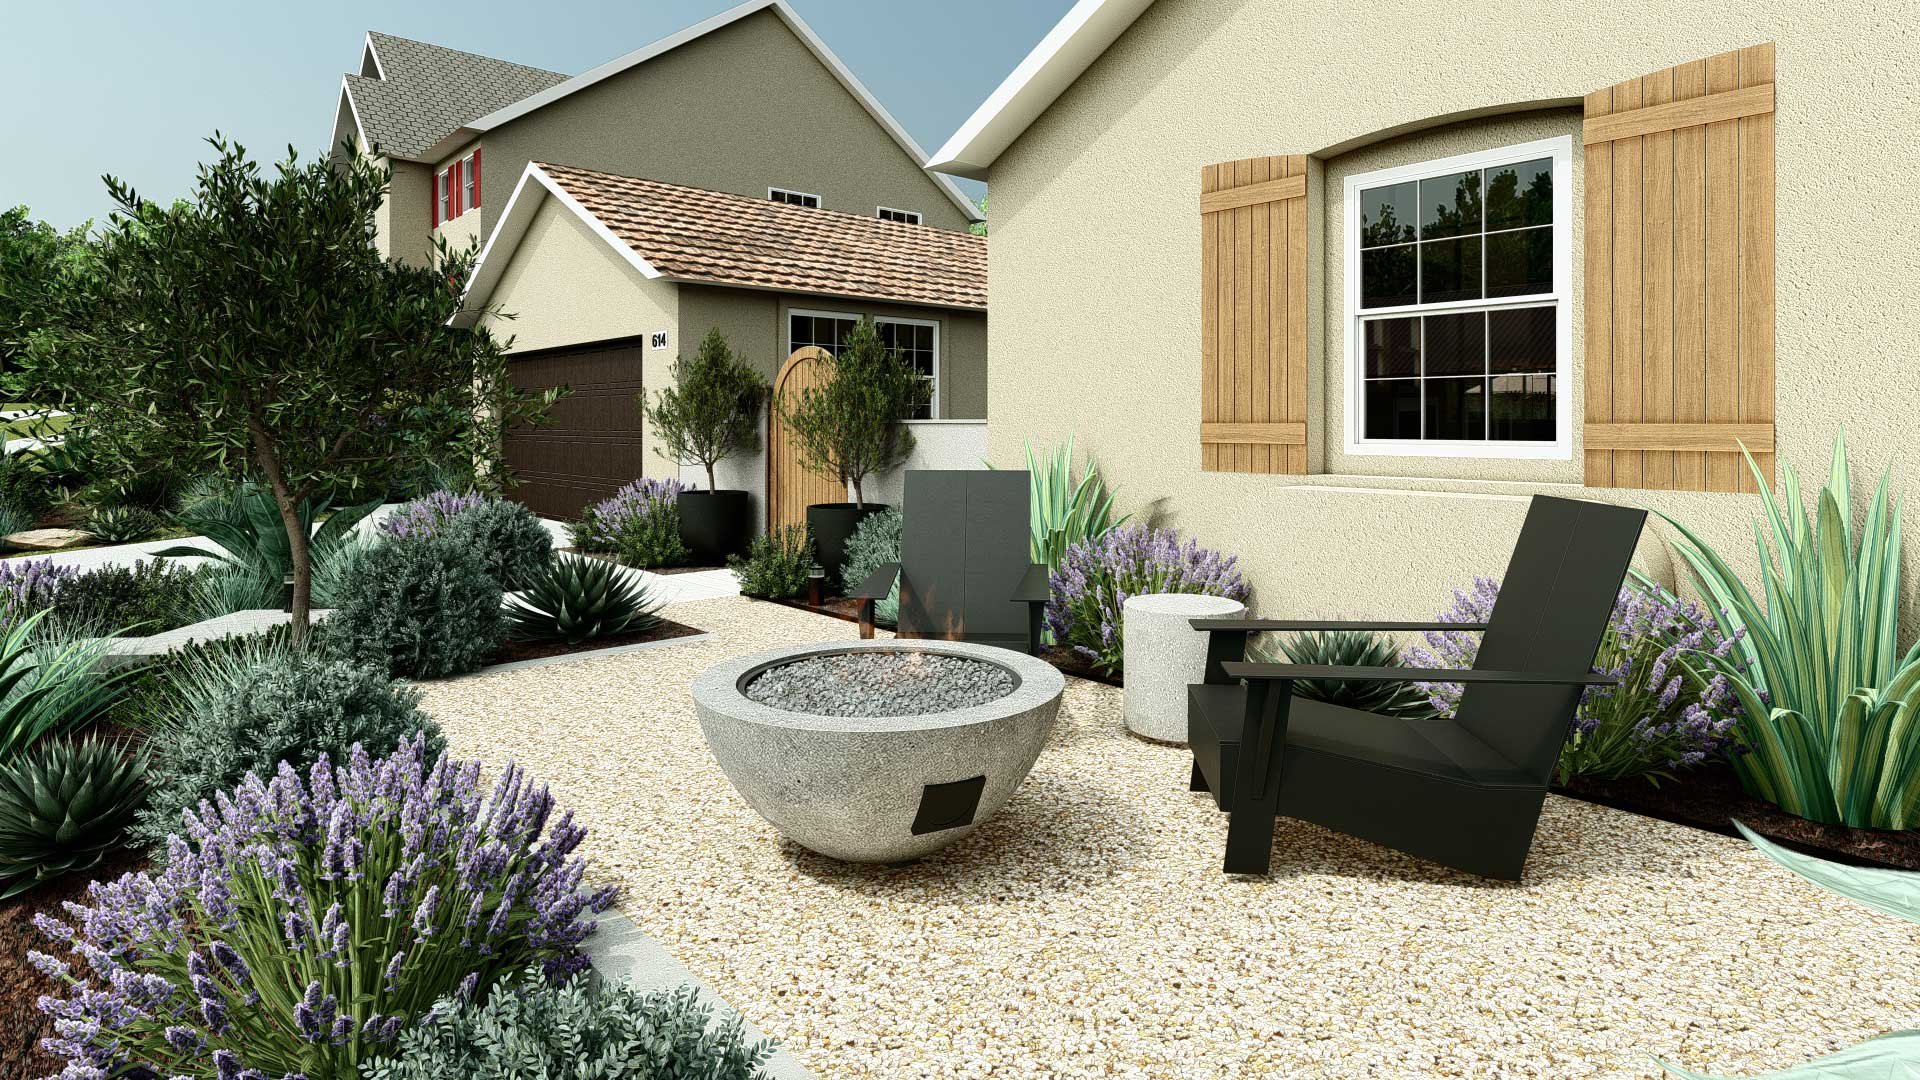  Color is as important for hardscape as it is for planting. Here, the gravel includes both from the house and grays from the concrete fire pit, while the dark chairs embrace the same bold contrast as the garage door. 